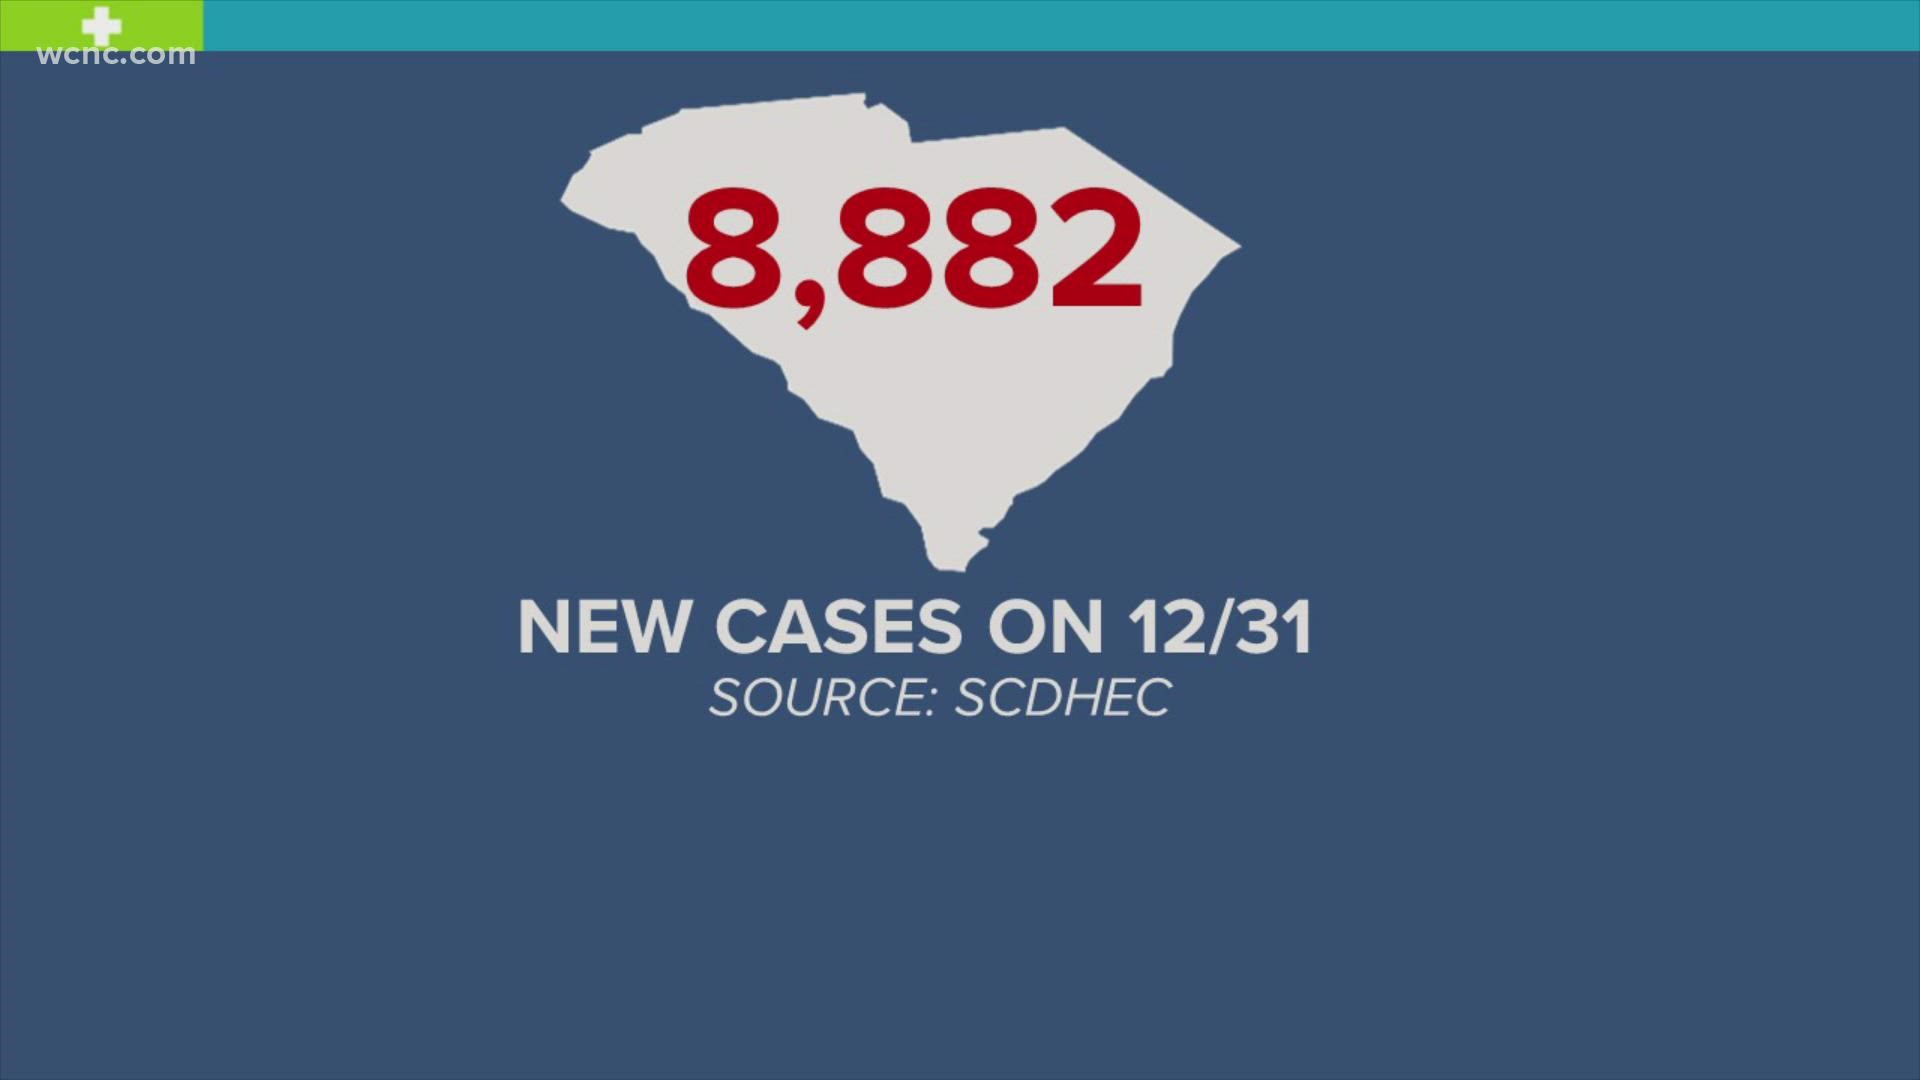 On Friday, DHEC reported 8,882 cases in a single day – a record-breaking number for South Carolina.